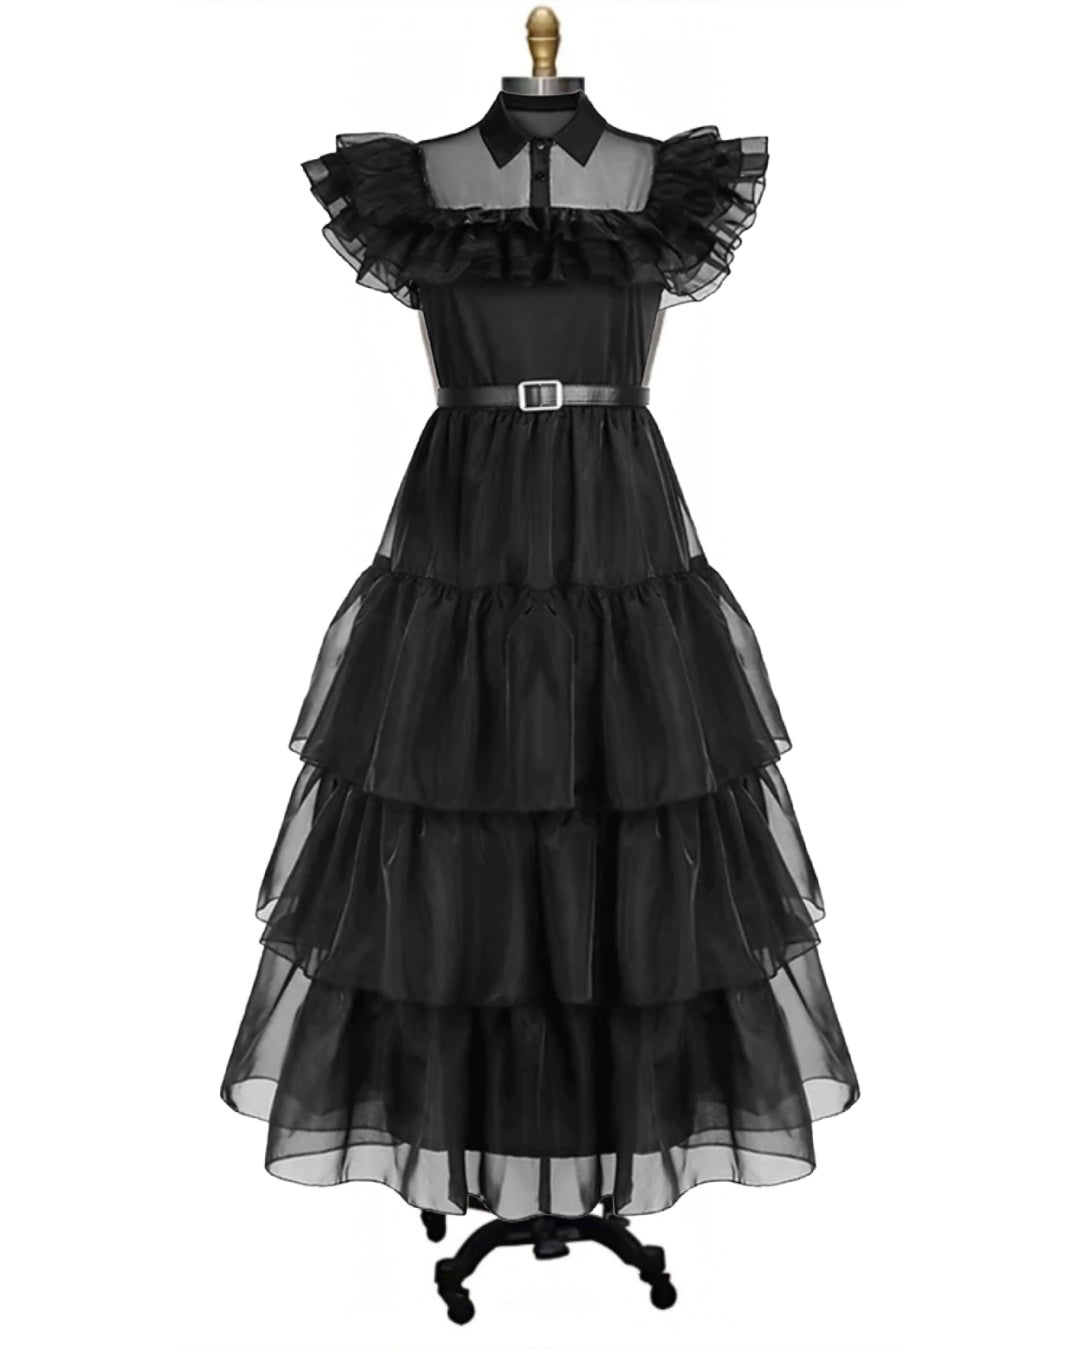 Wednesday- the Girly Goth Black Lace Dress